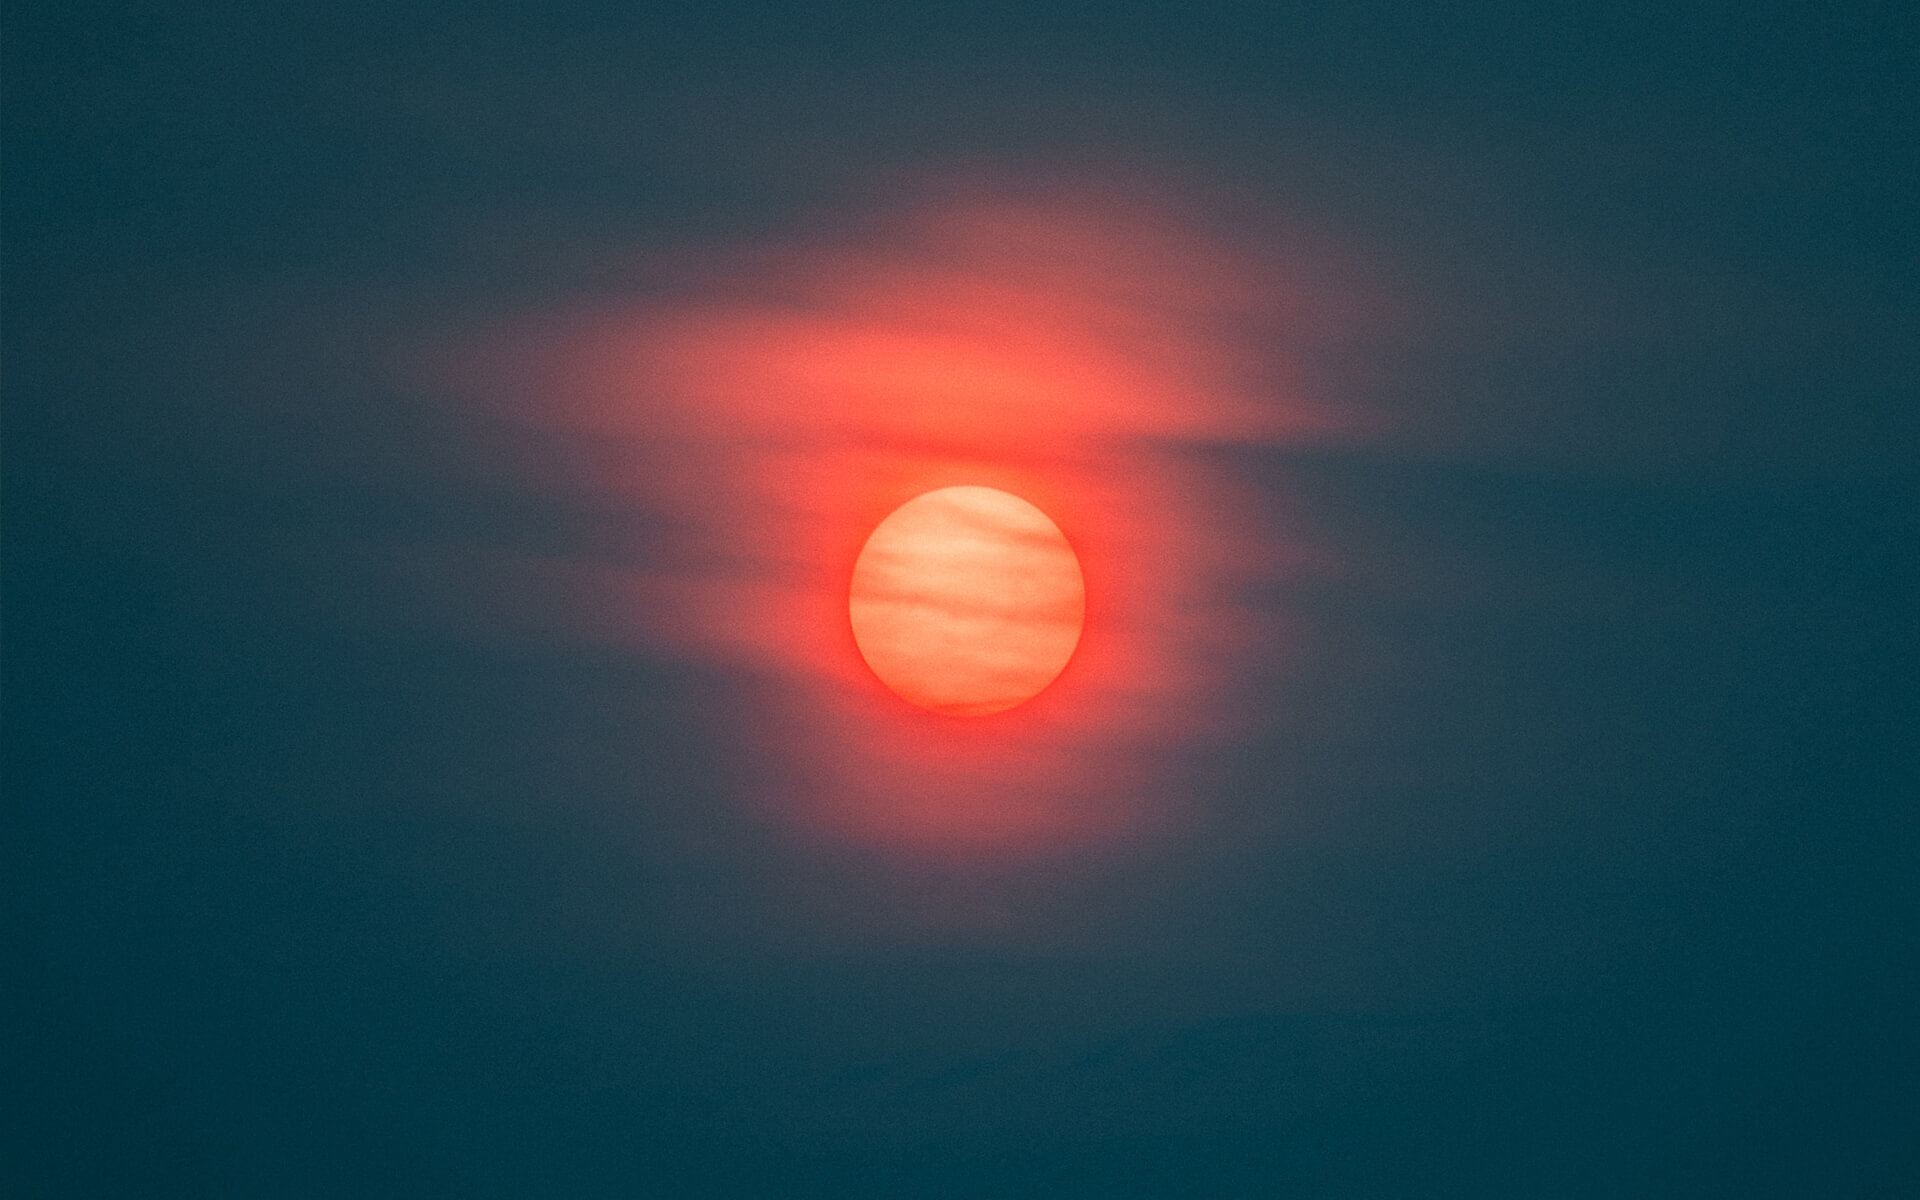 A photo of the sun producing red light against a dark blue sky, with clouds passing across its face.